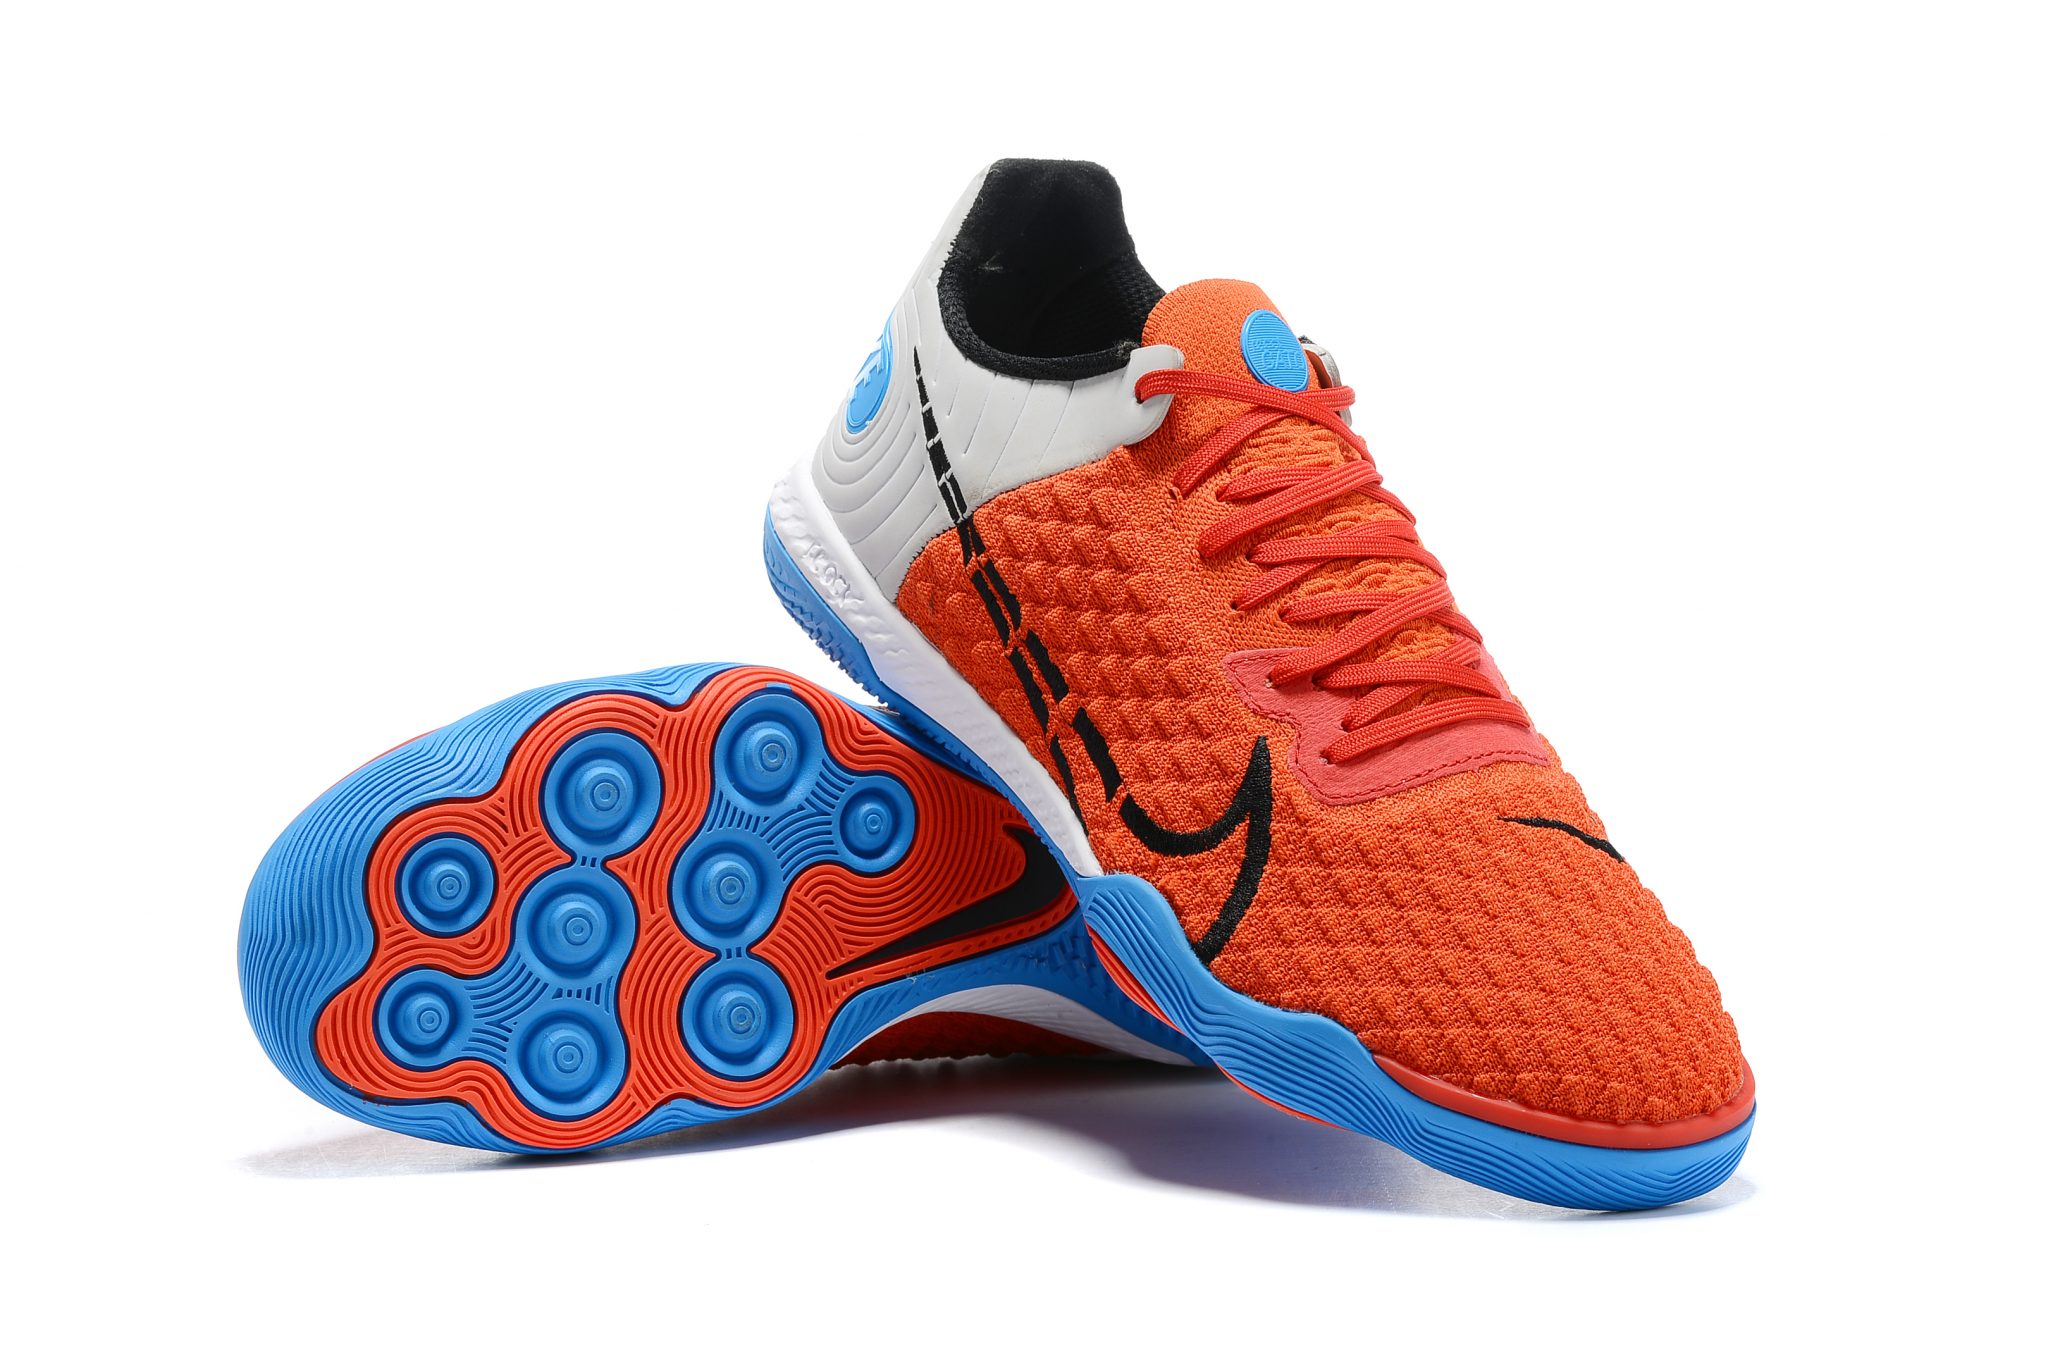 Nike Reactgato IC red and blue football boots for sale